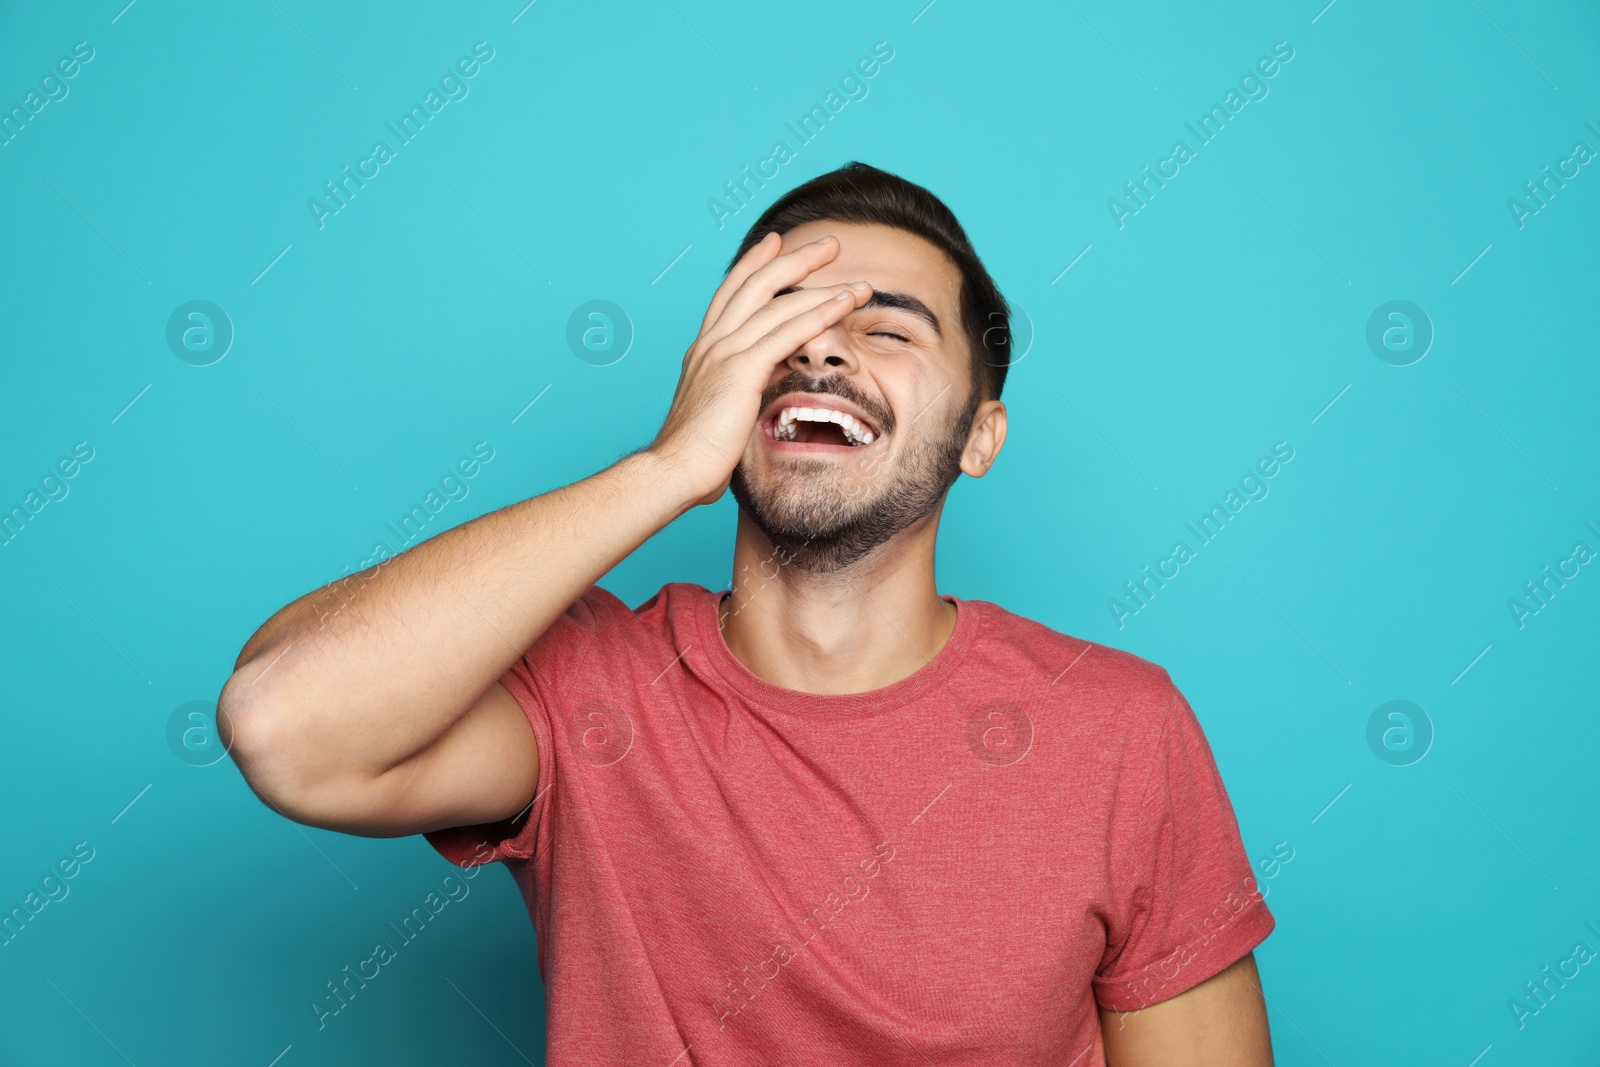 Photo of Handsome young man laughing against color background